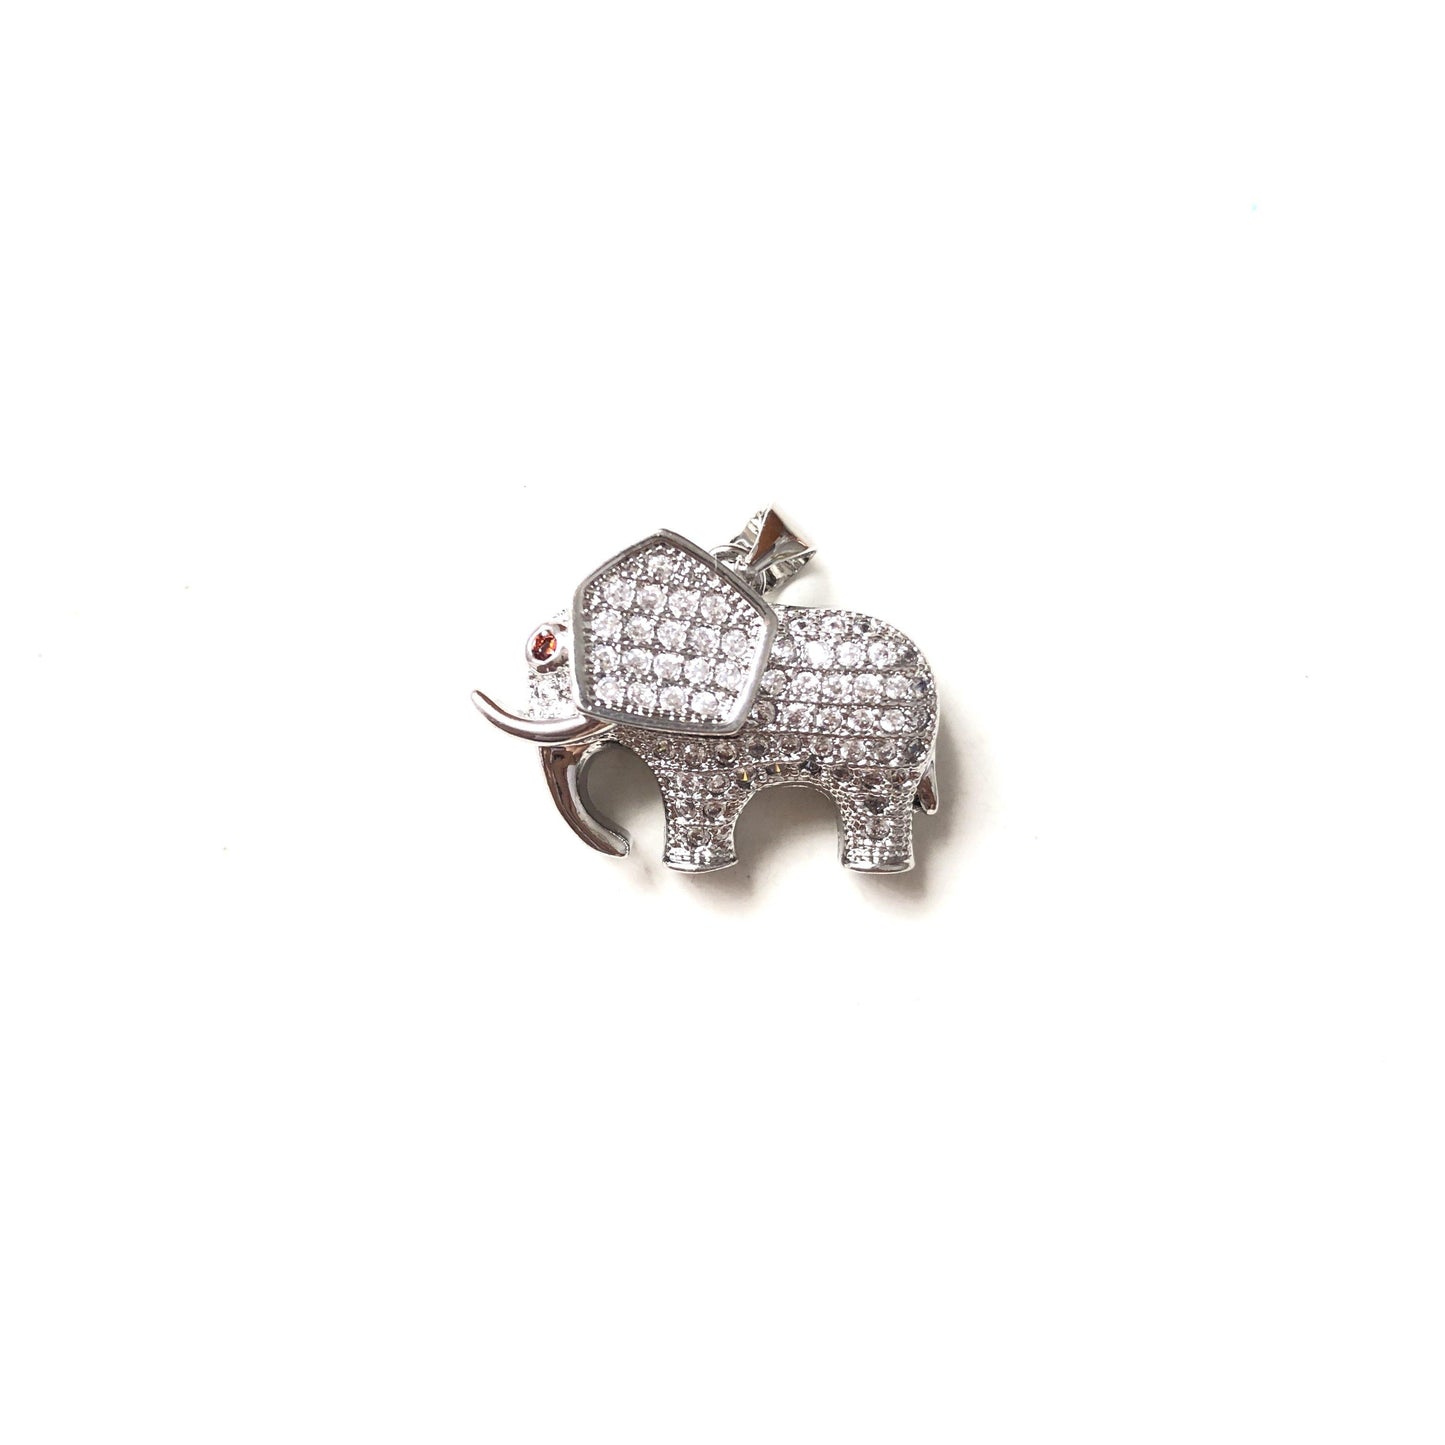 10pcs/lot 22*17mm CZ Paved Elephant Charms Silver CZ Paved Charms Animals & Insects Charms Beads Beyond